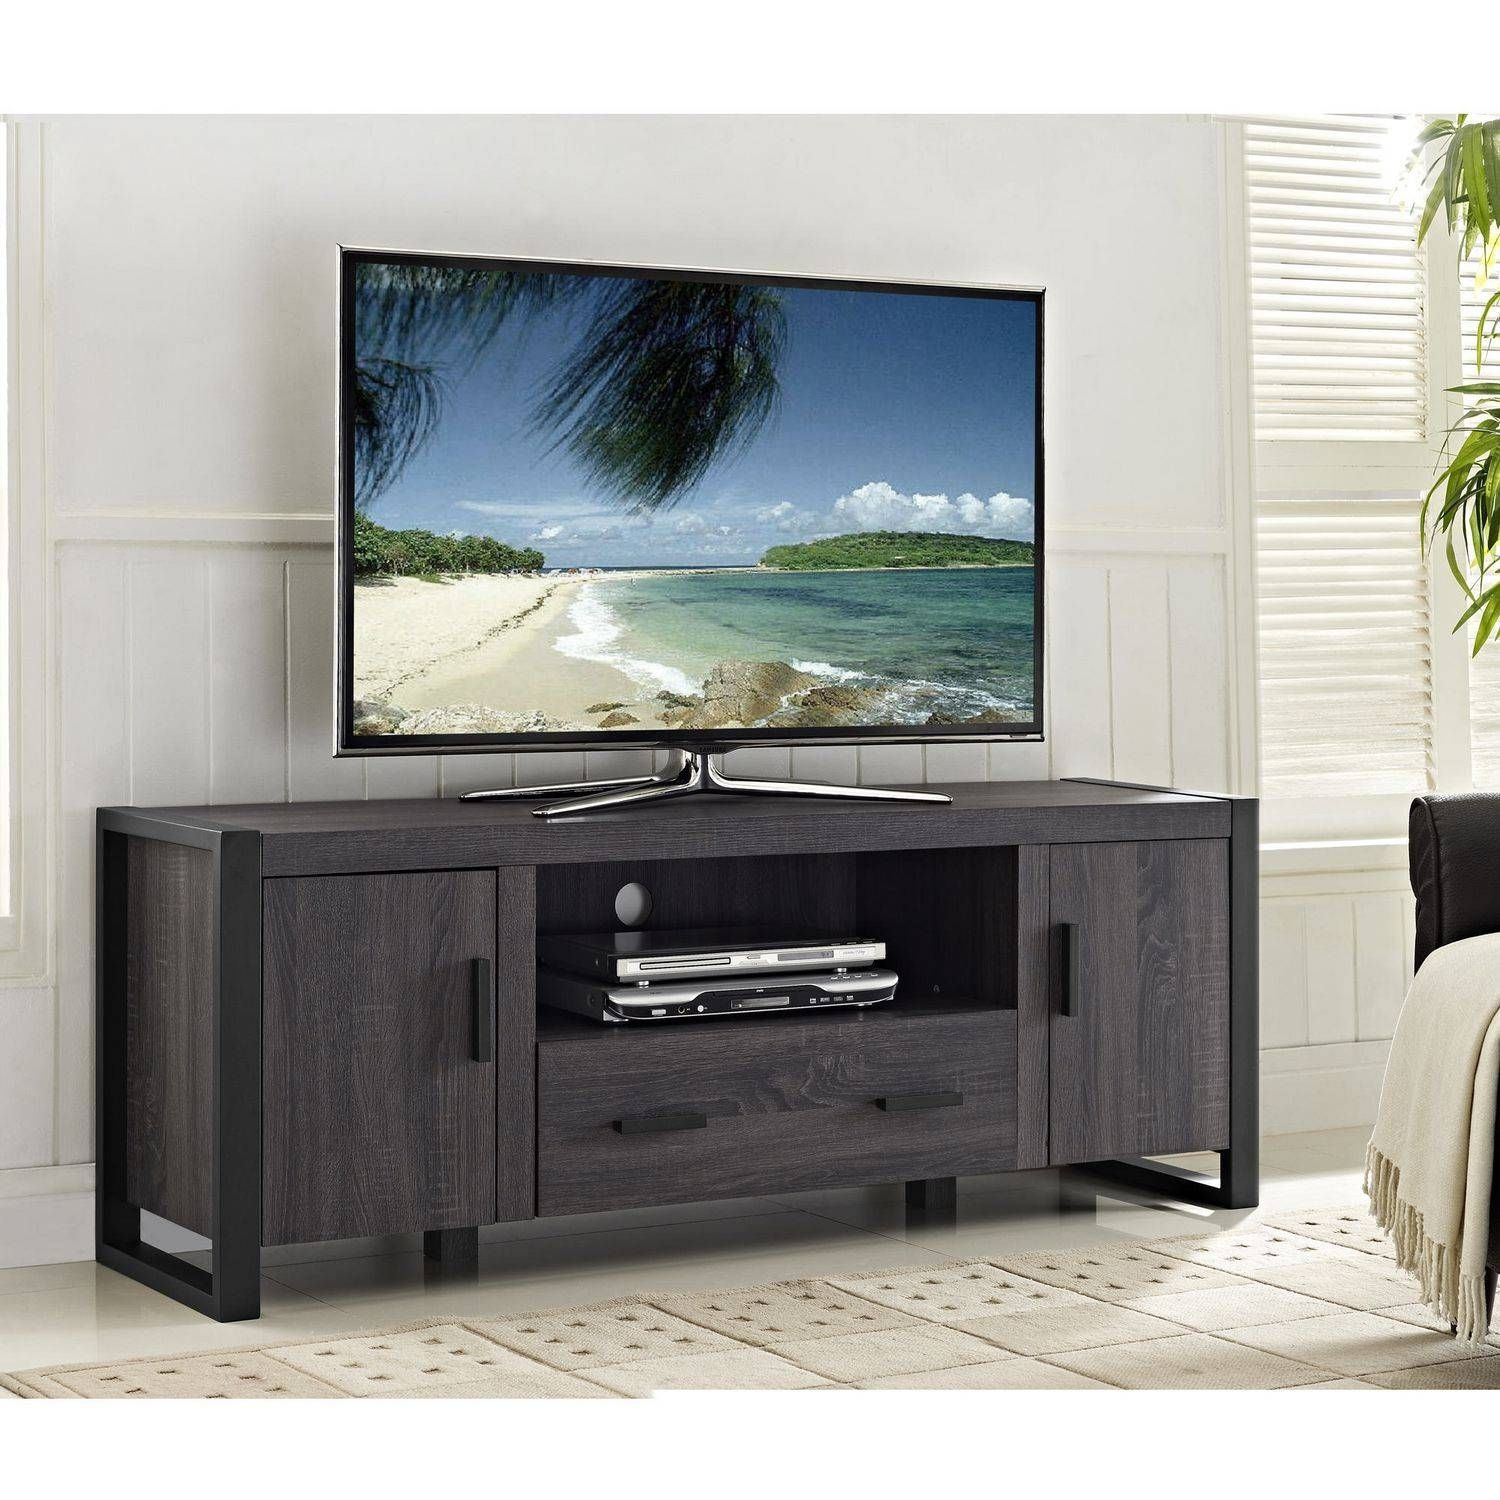 We Furniture 60" Grey Wood Tv Stand Console | Walmart Canada Throughout Grey Tv Stands (View 1 of 15)